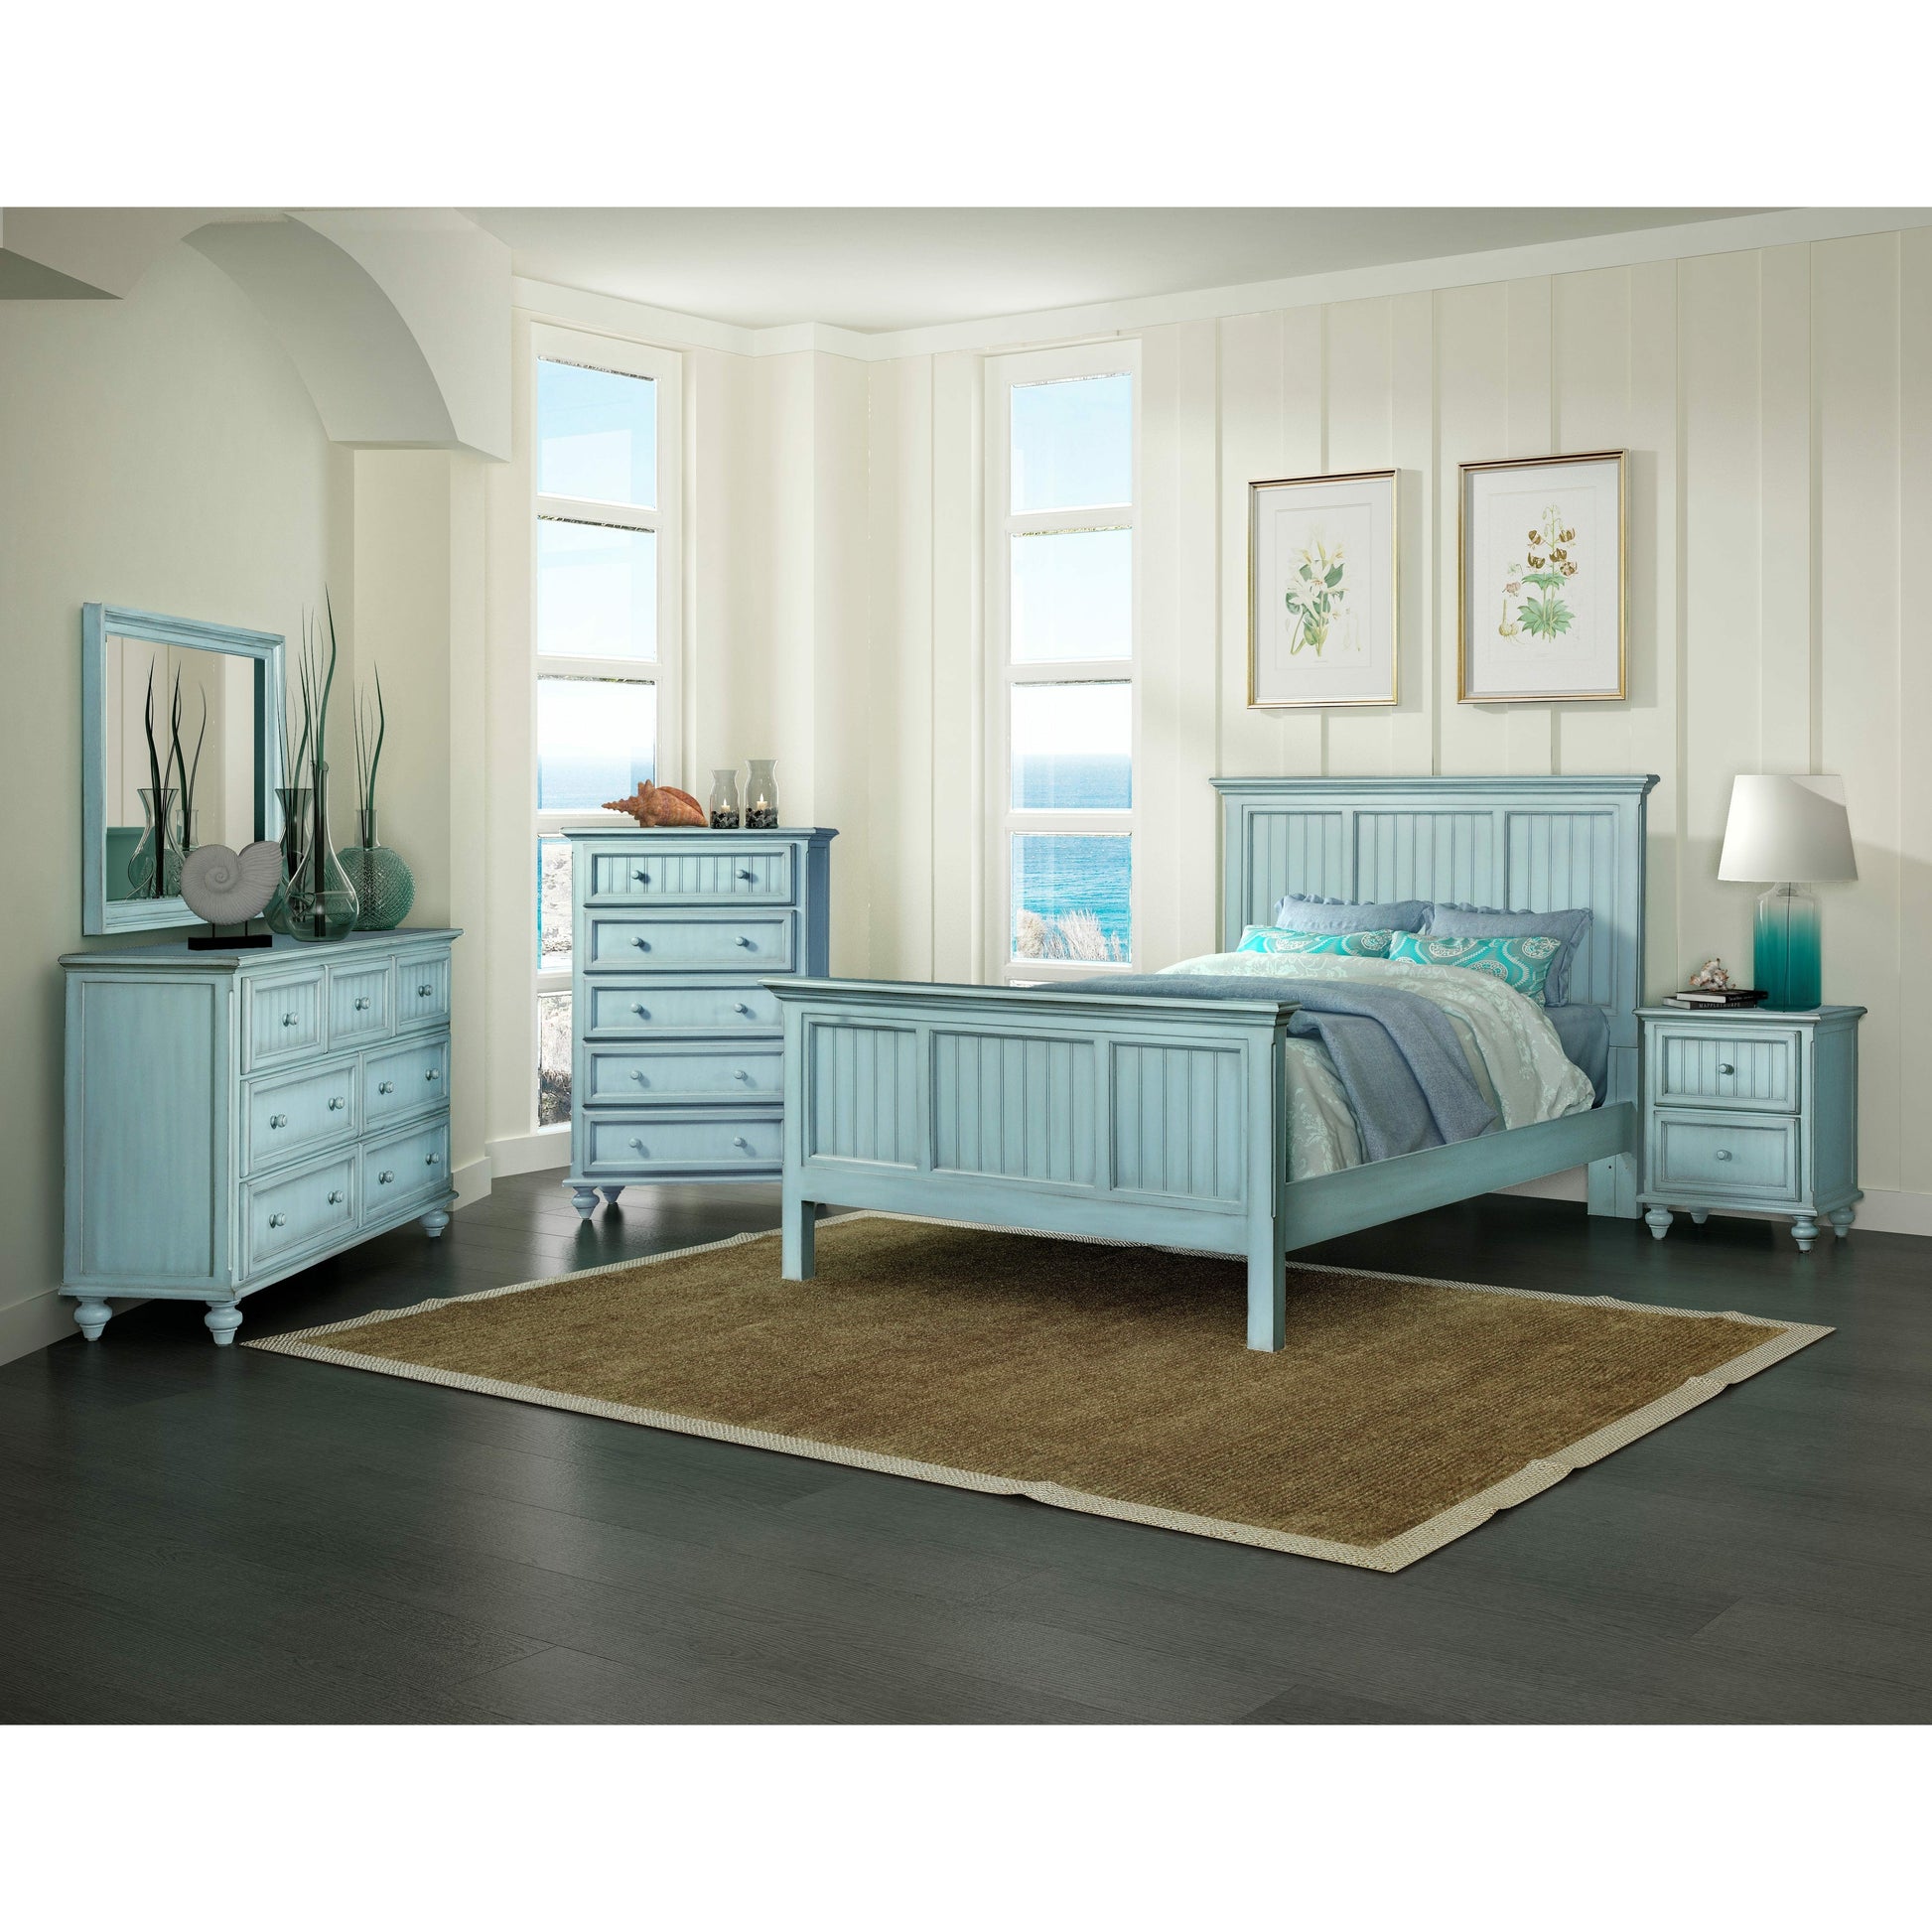 Sea Winds Trading Monaco Queen Bed B818QBED Indoor Sea Winds Trading Co 